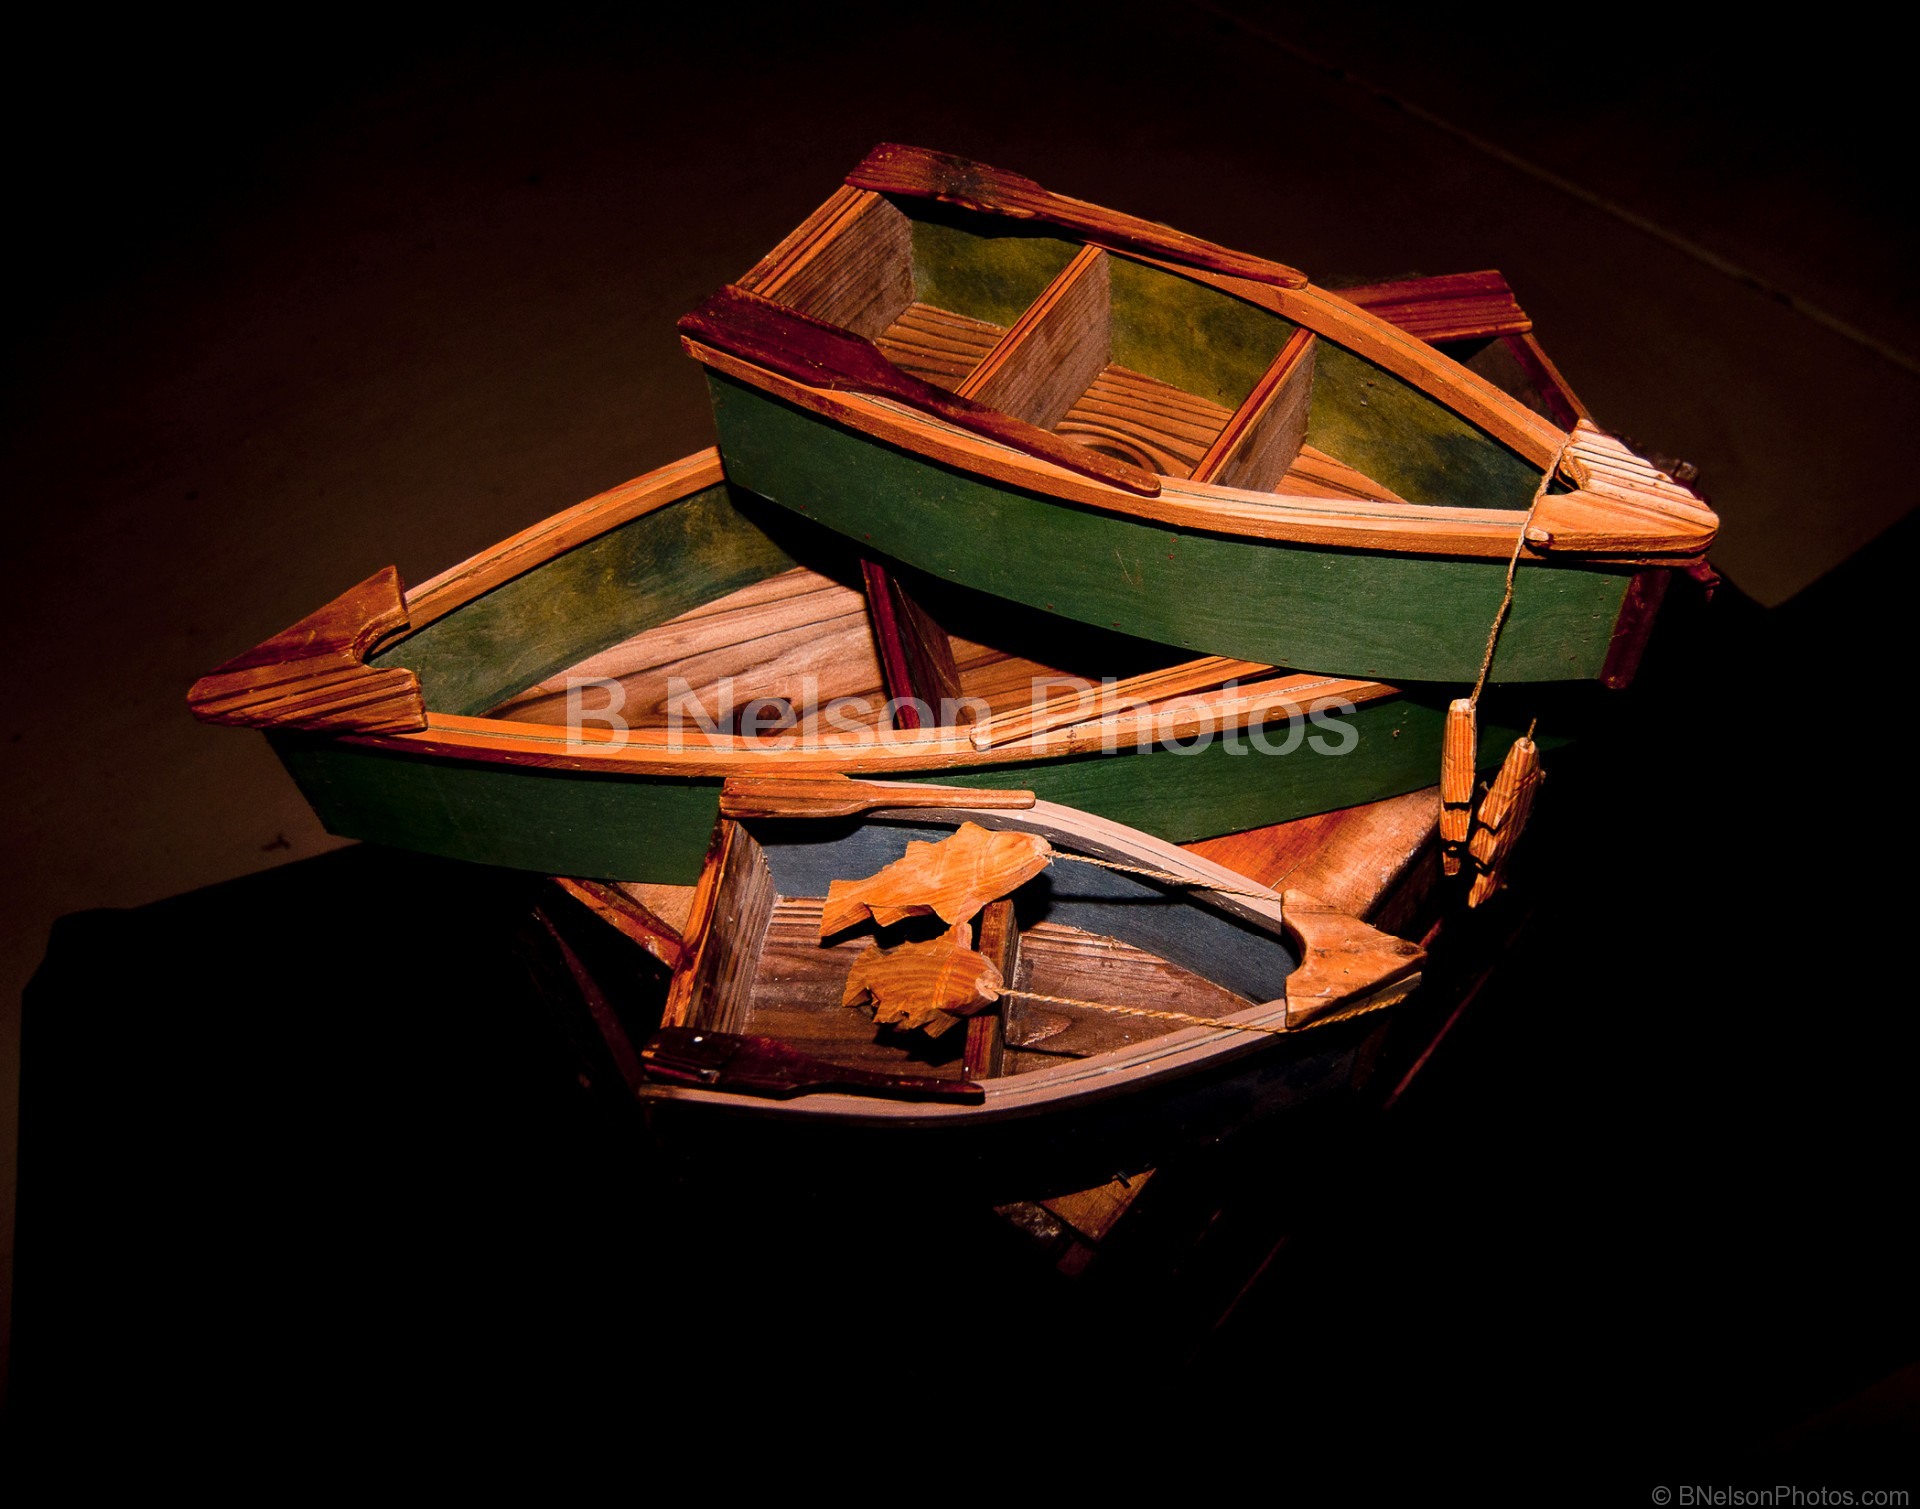 Toy Boats From the Past